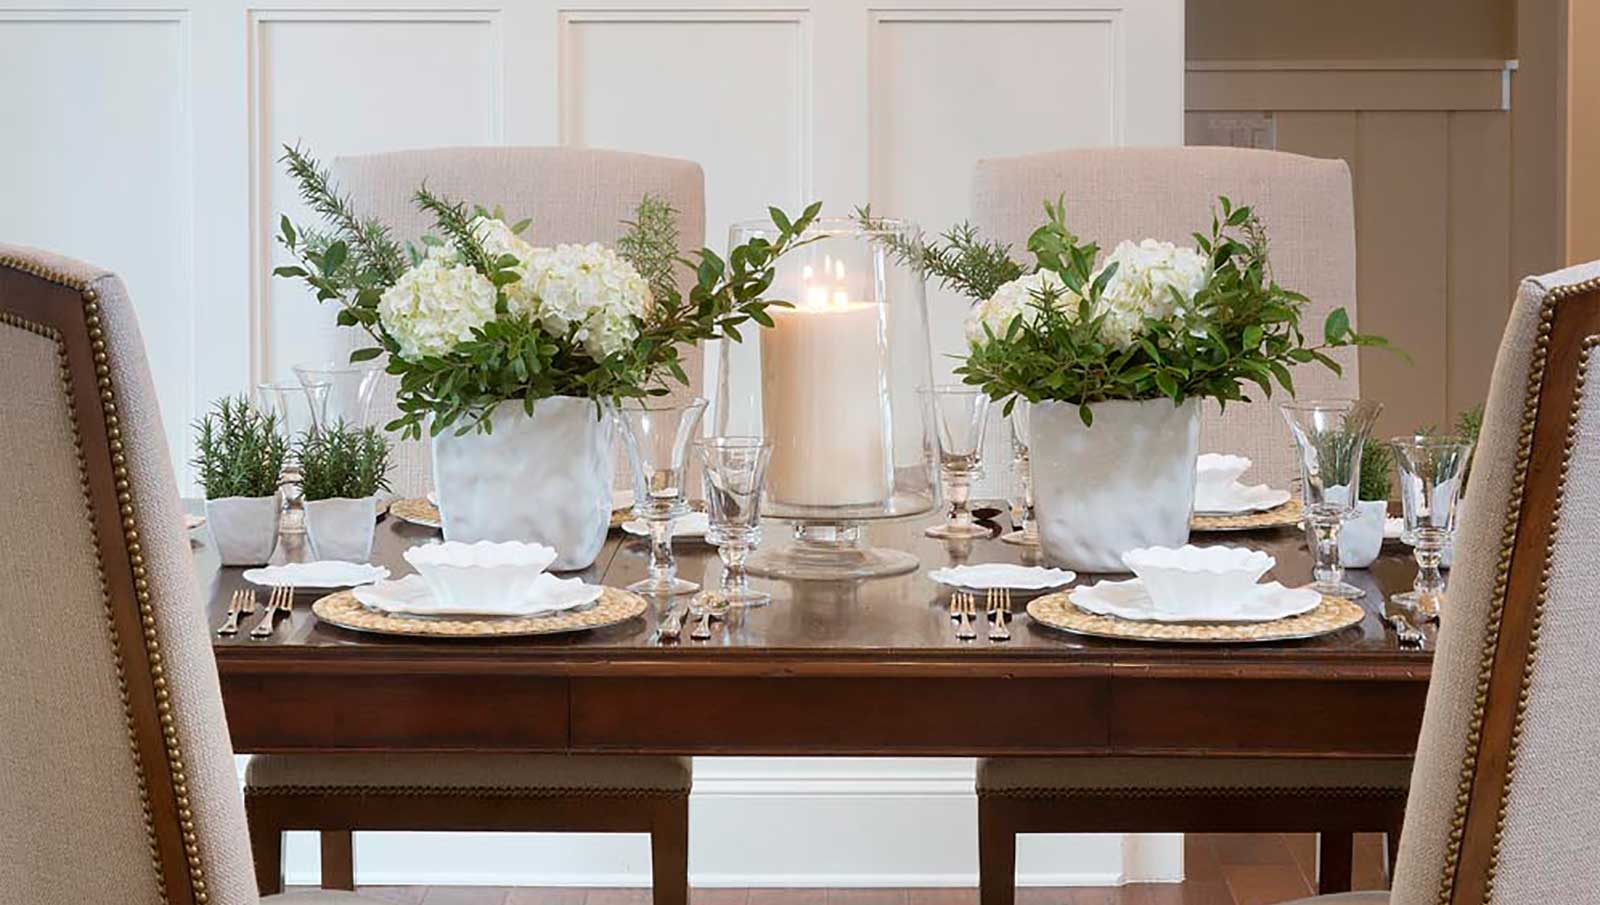 formal dining room interiors by j banks design group reflect the gracious living the firm's clients demand from its design team